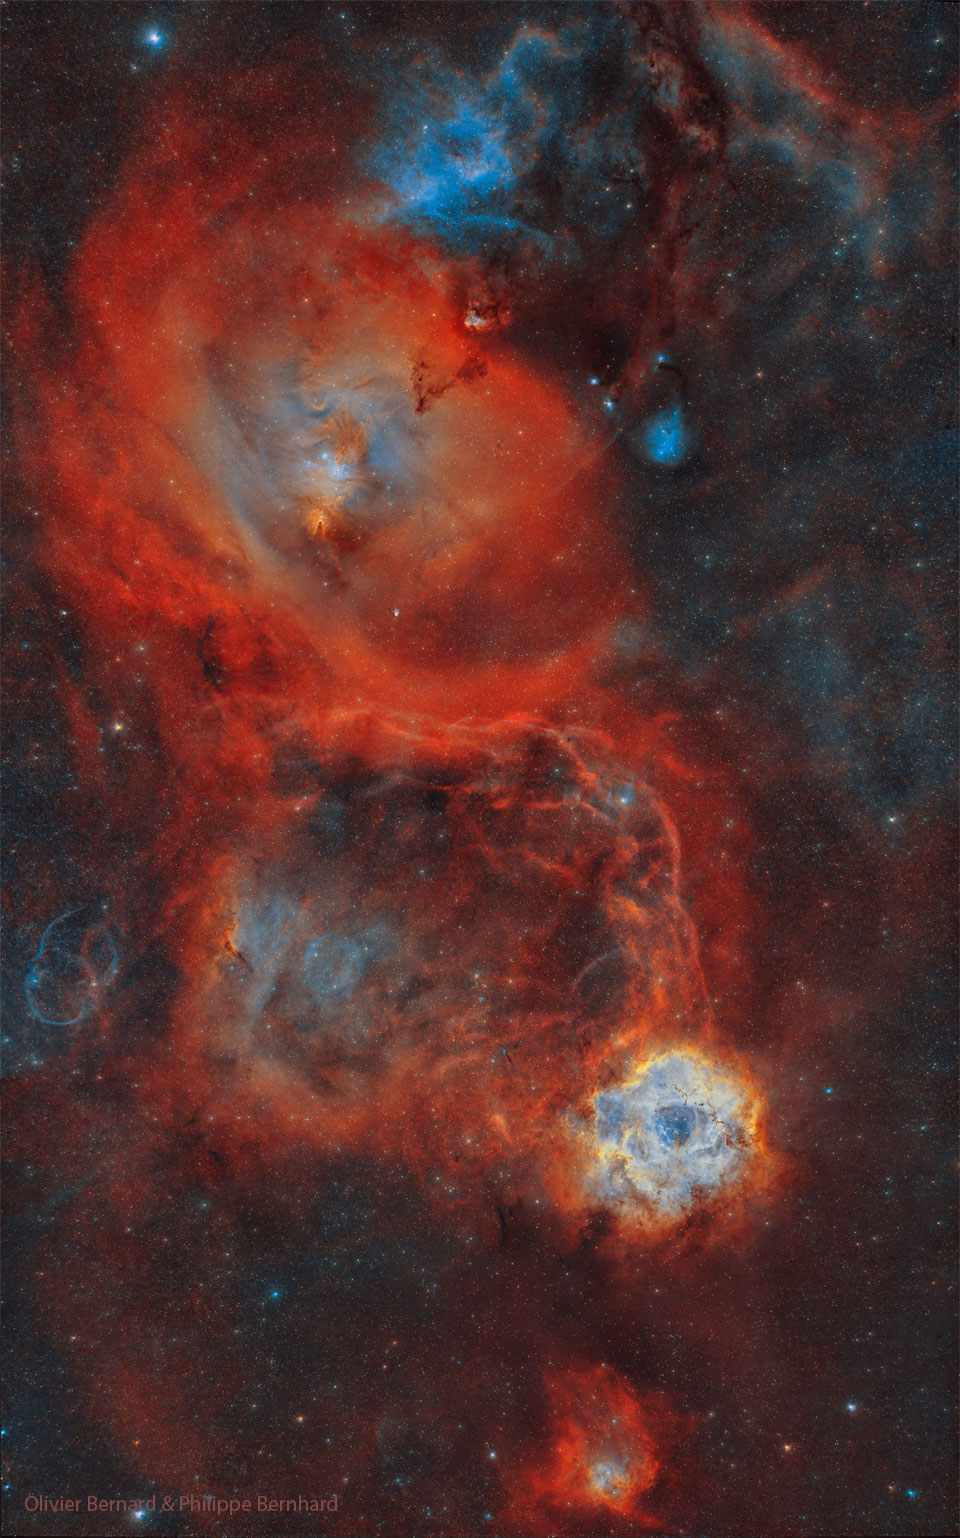 A busy star field is shown with several large red
nebulae. The Rosette Nebula is among them and seen on 
the lower right, while the nebula surrounding the 
Cone Nebula is larger and visible toward the upper left.
Więcej szczegółowych informacji w opisie poniżej.